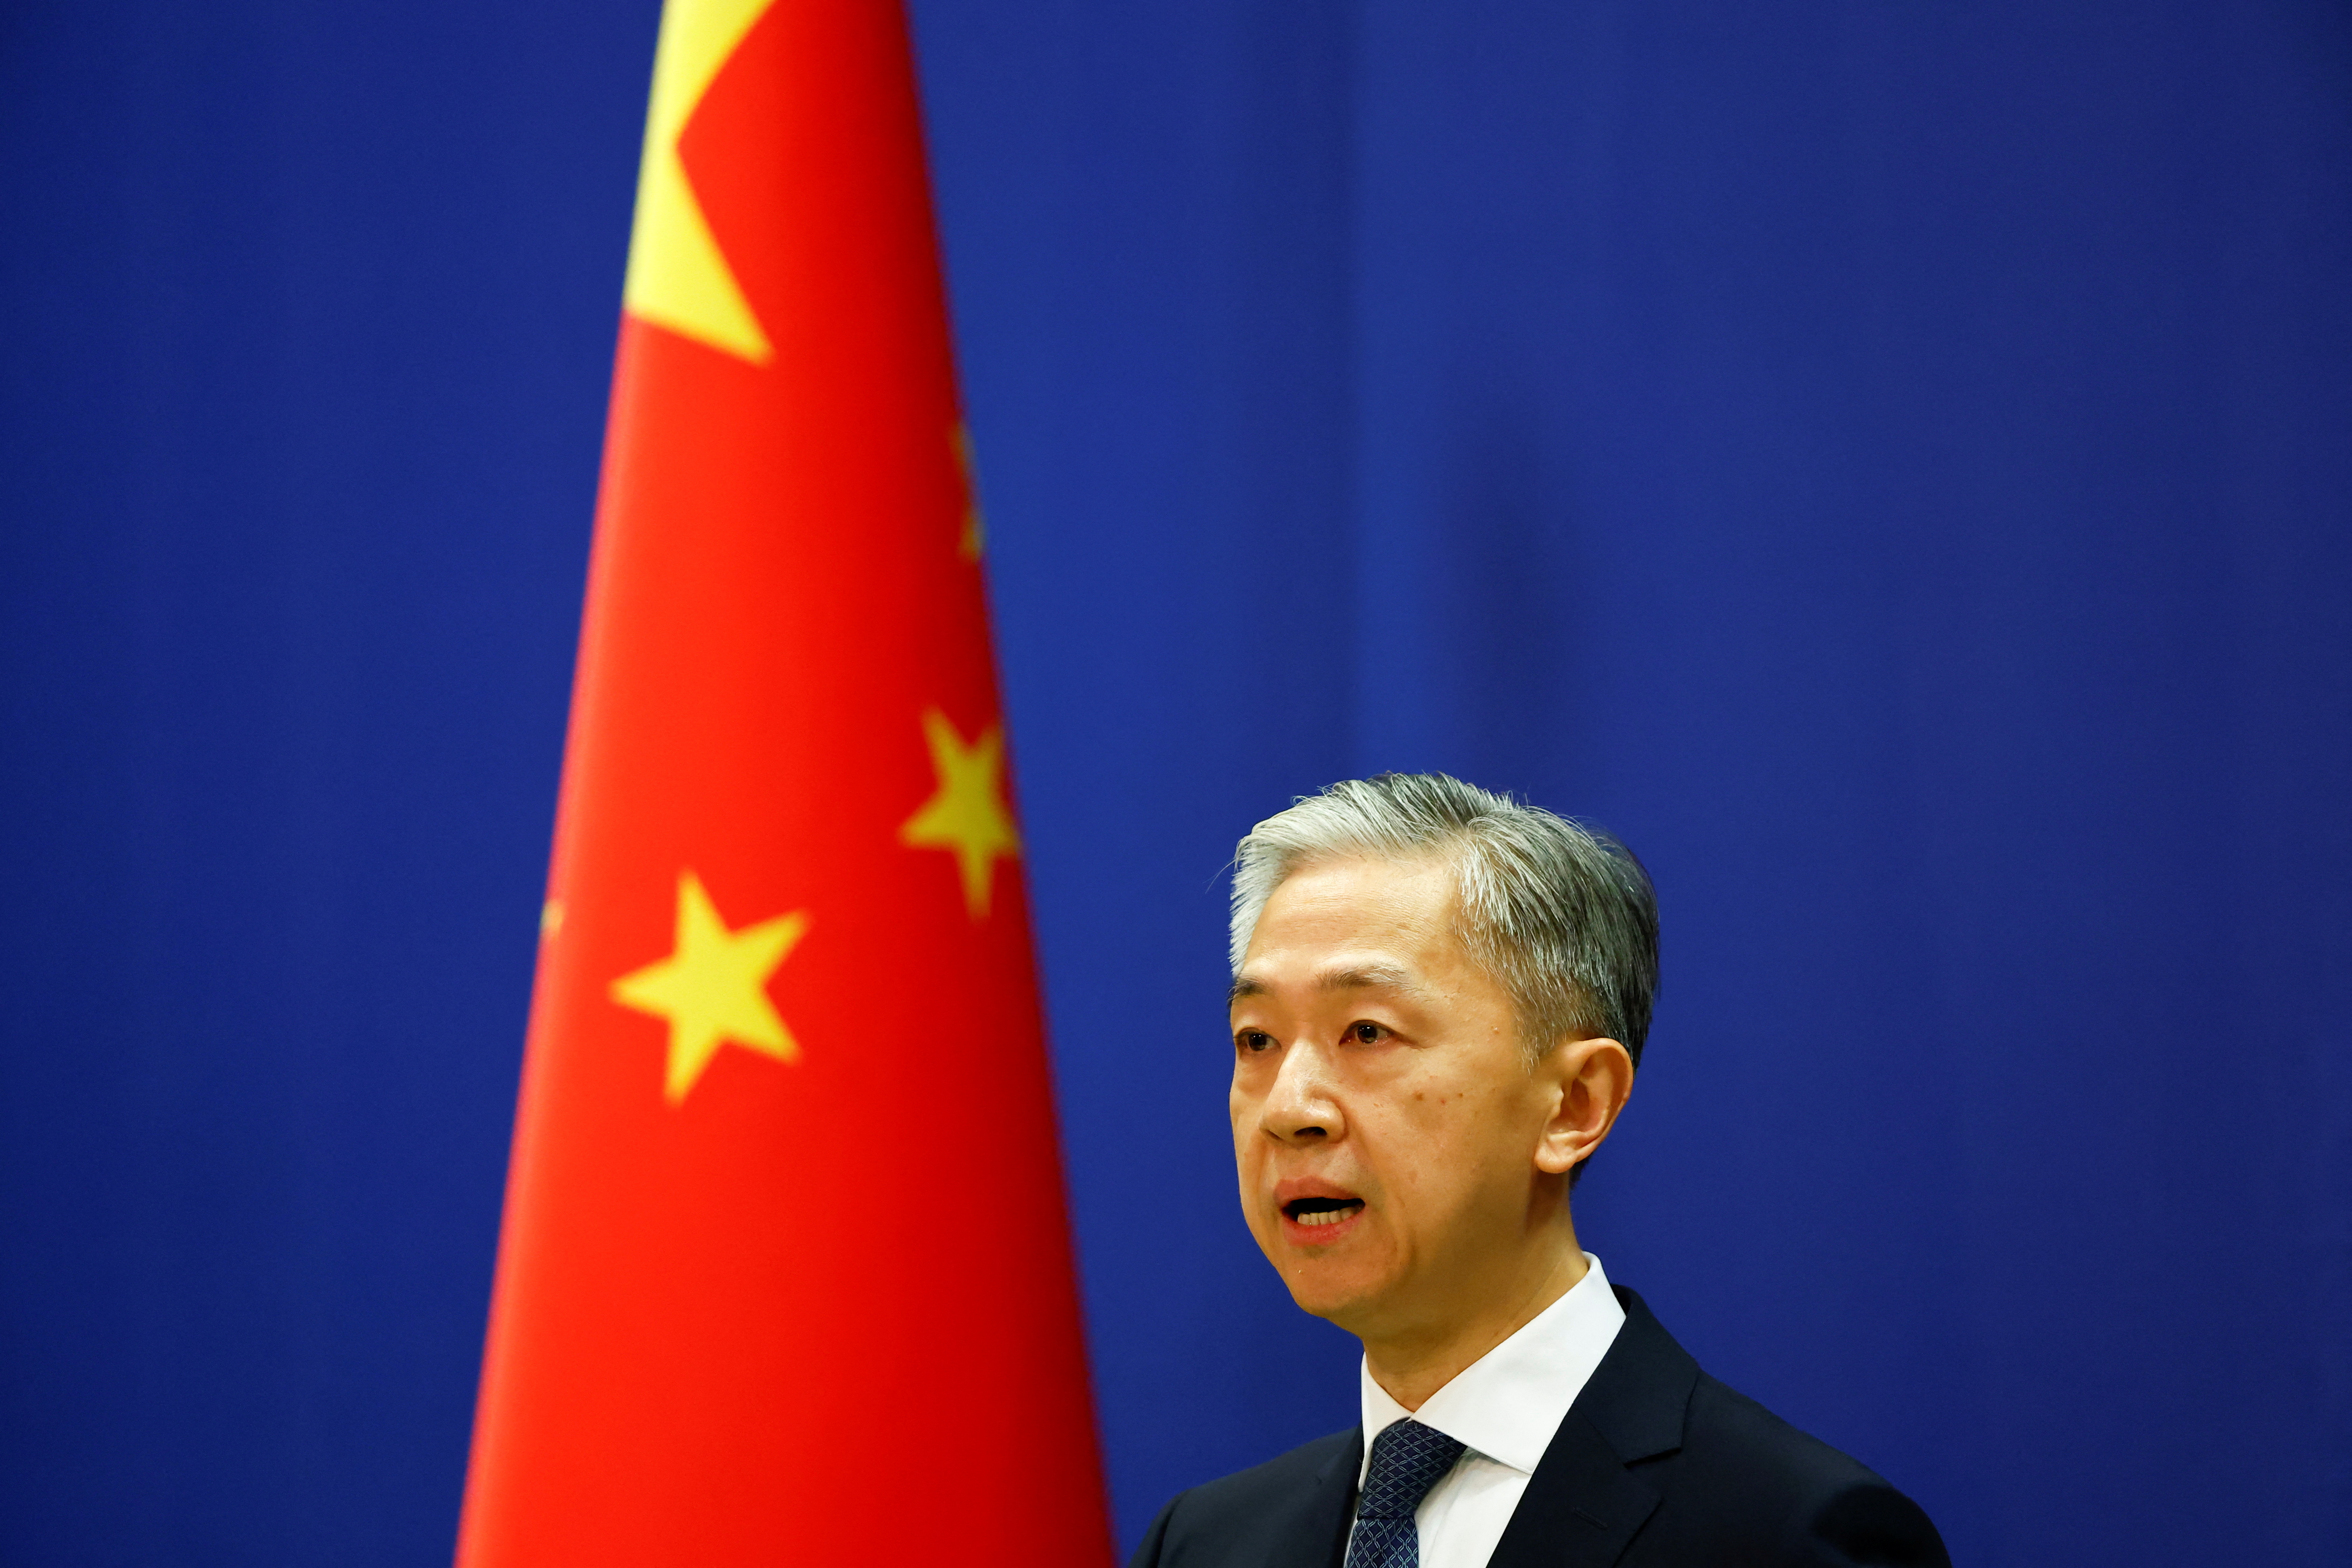 Chinese Foreign Ministry spokesperson Wang Wenbin spekas during a news conference in Beijing